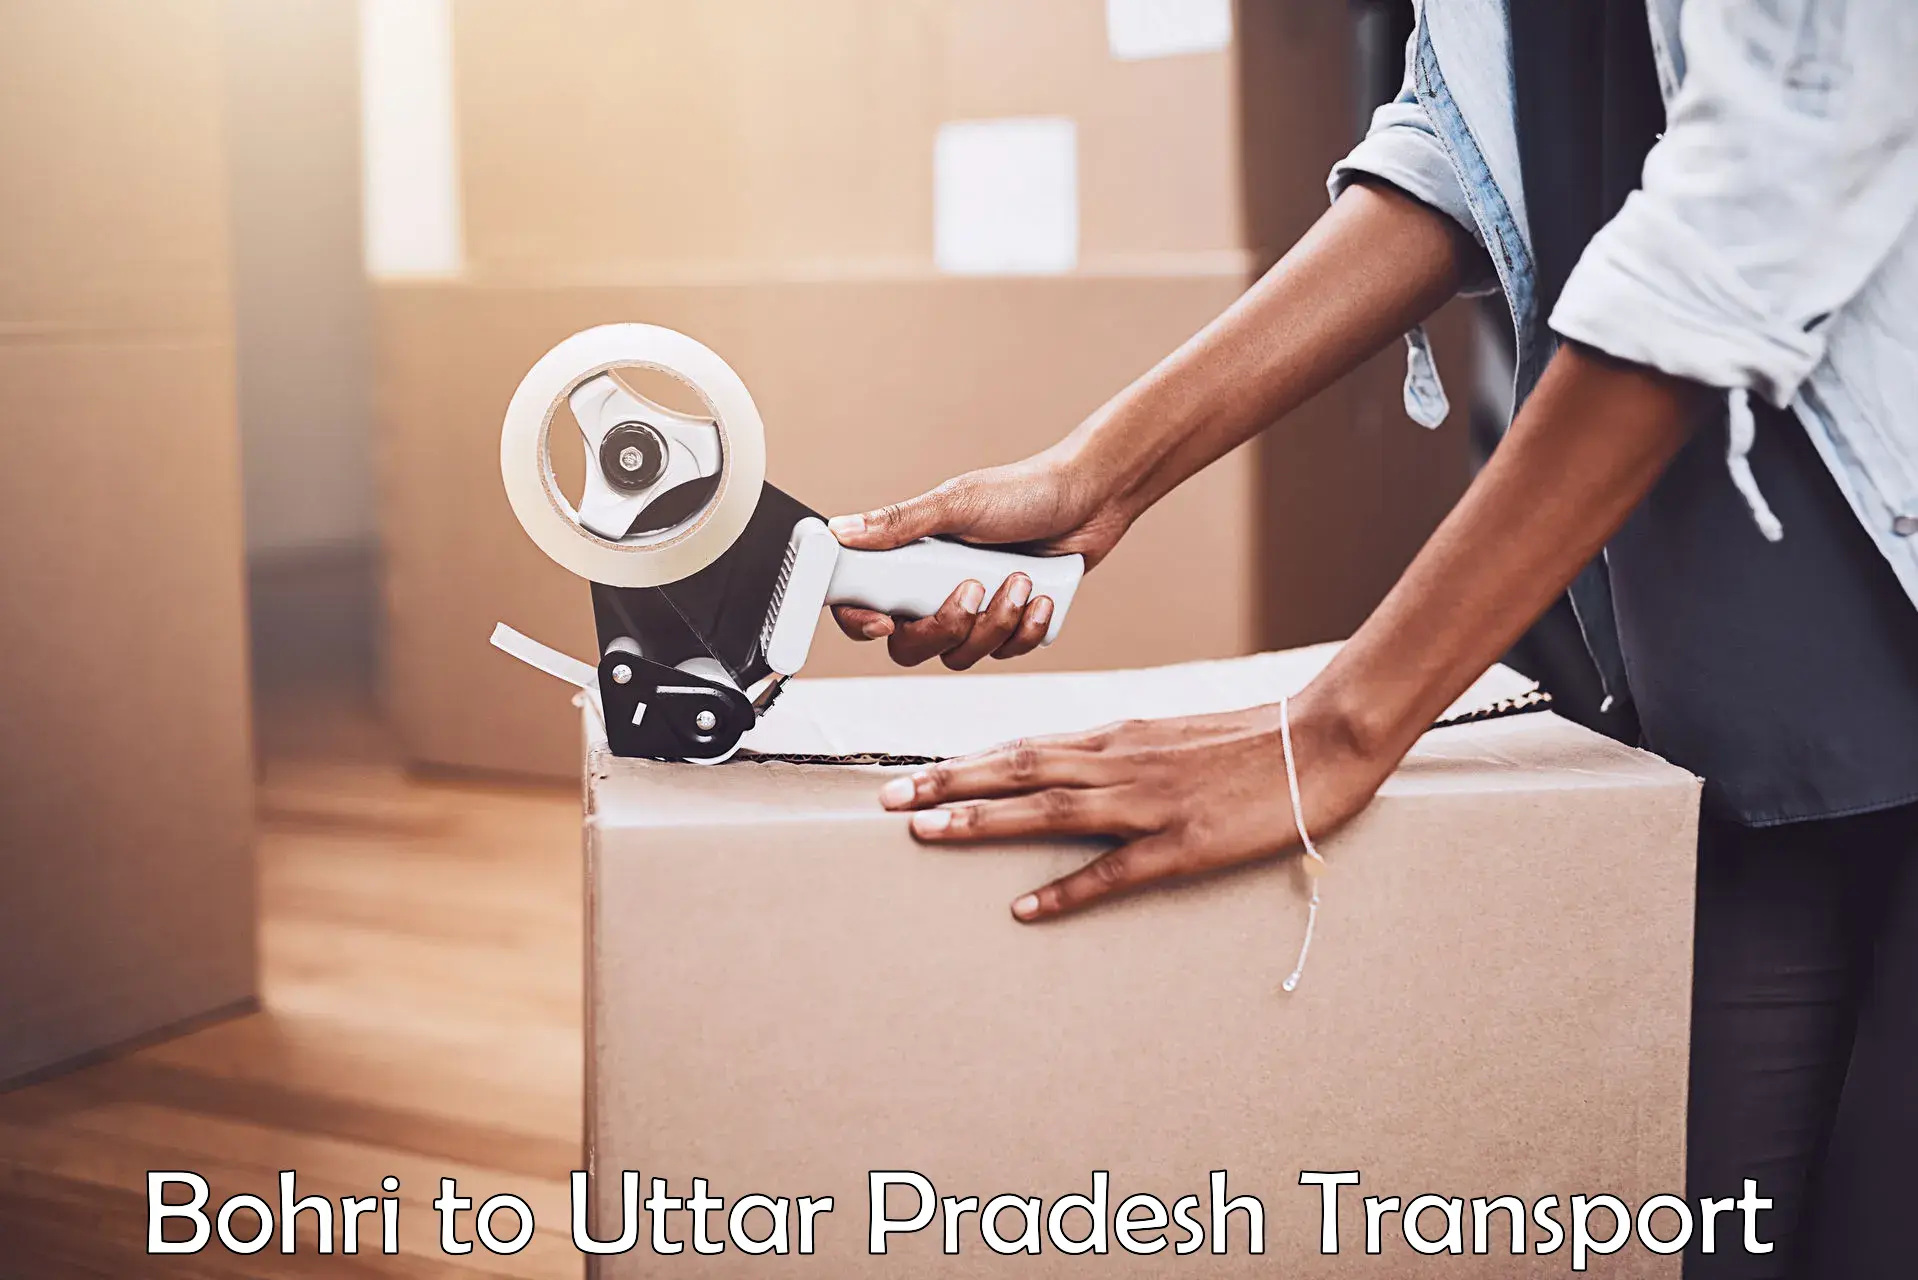 Two wheeler parcel service Bohri to Lucknow